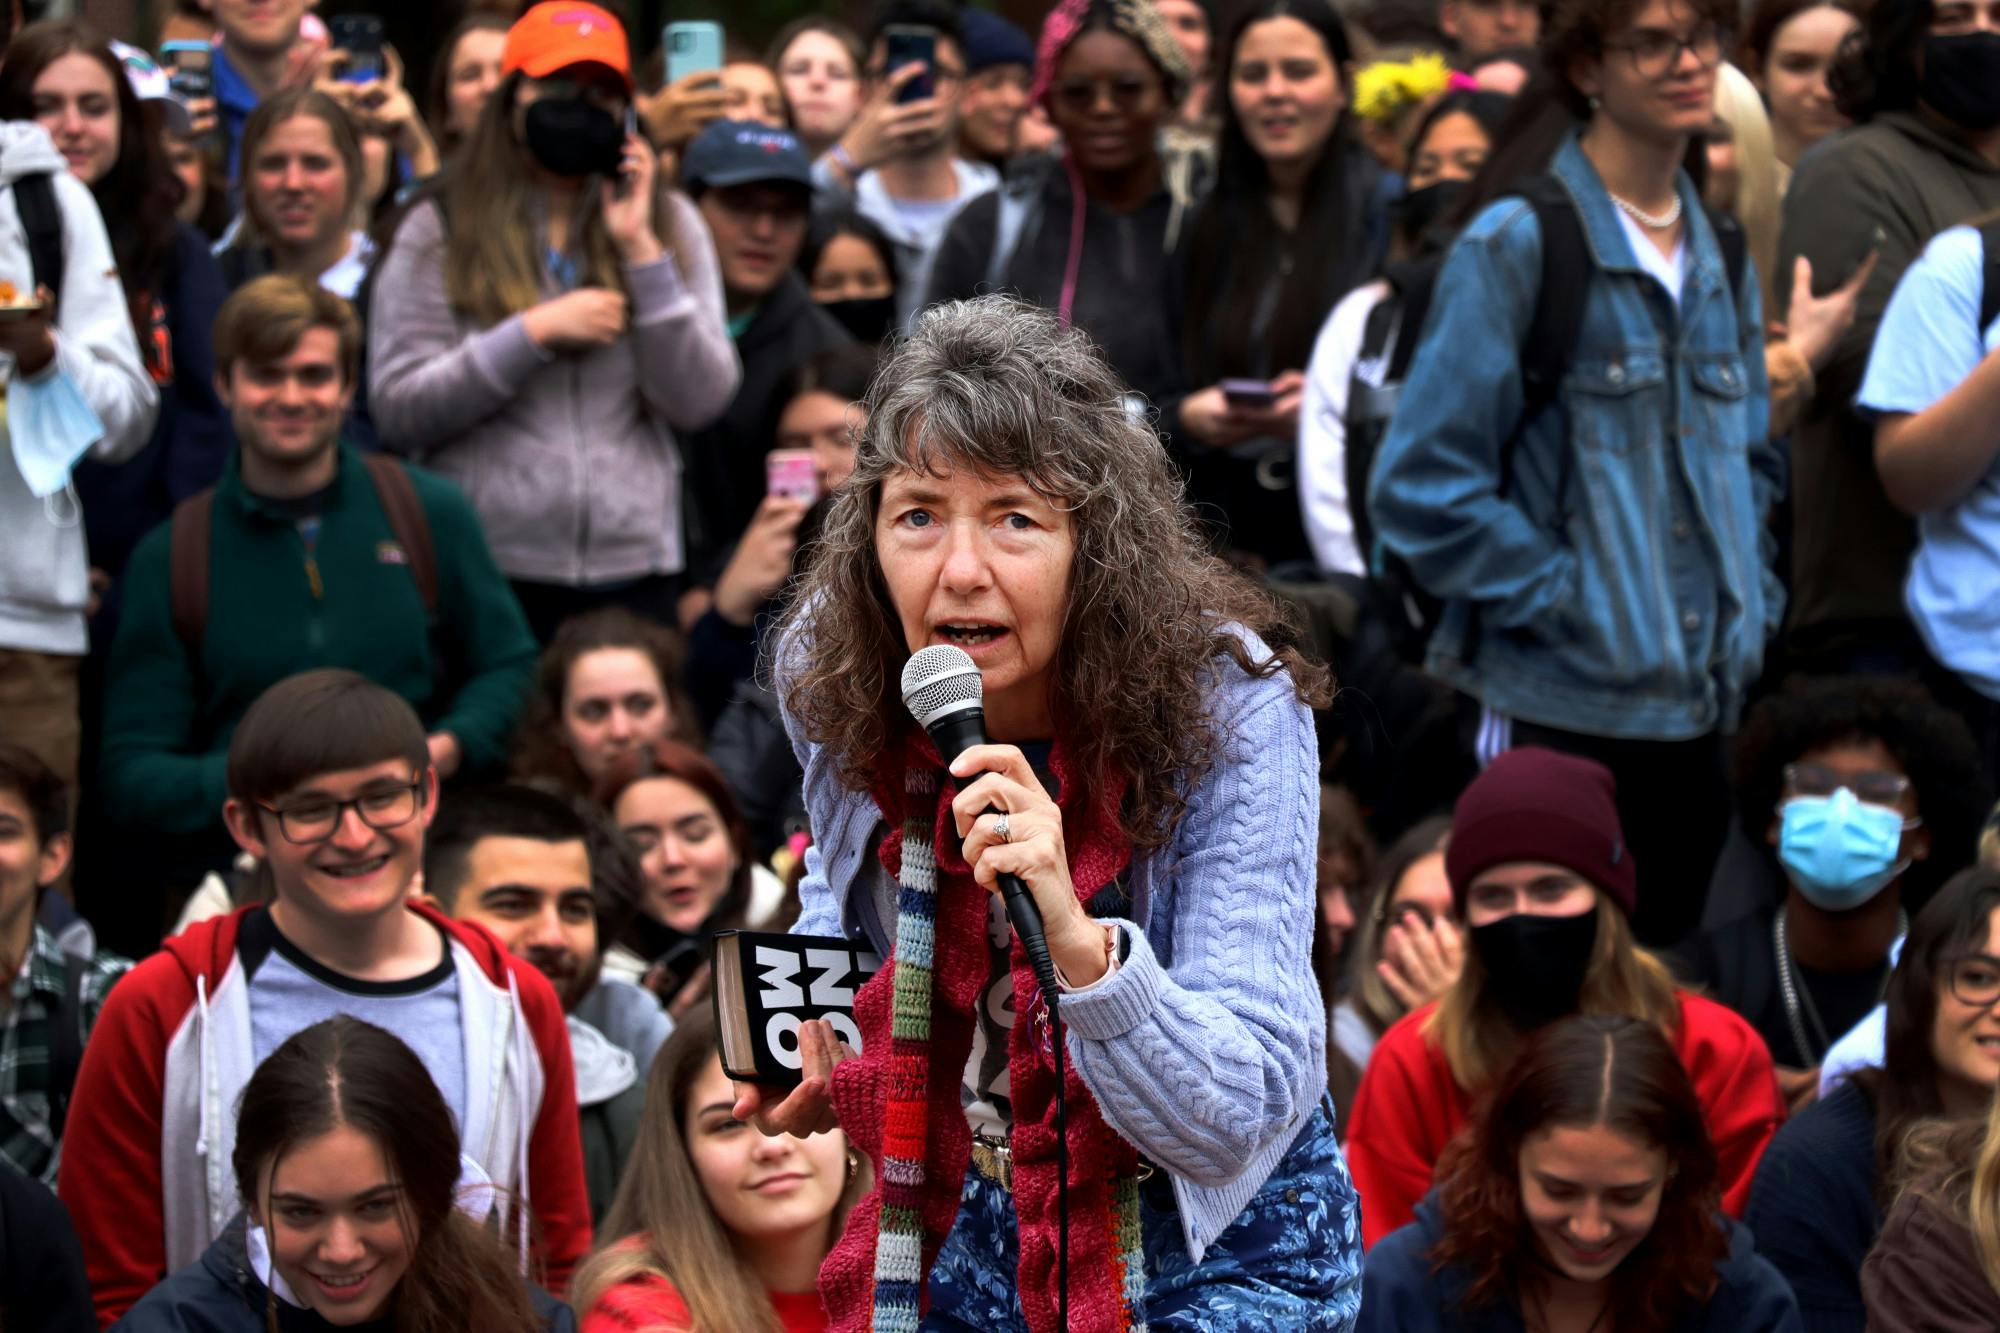 Infamous TikTok street preacher “Sister Cindy” returns to UF, draws a crowd of heckling students